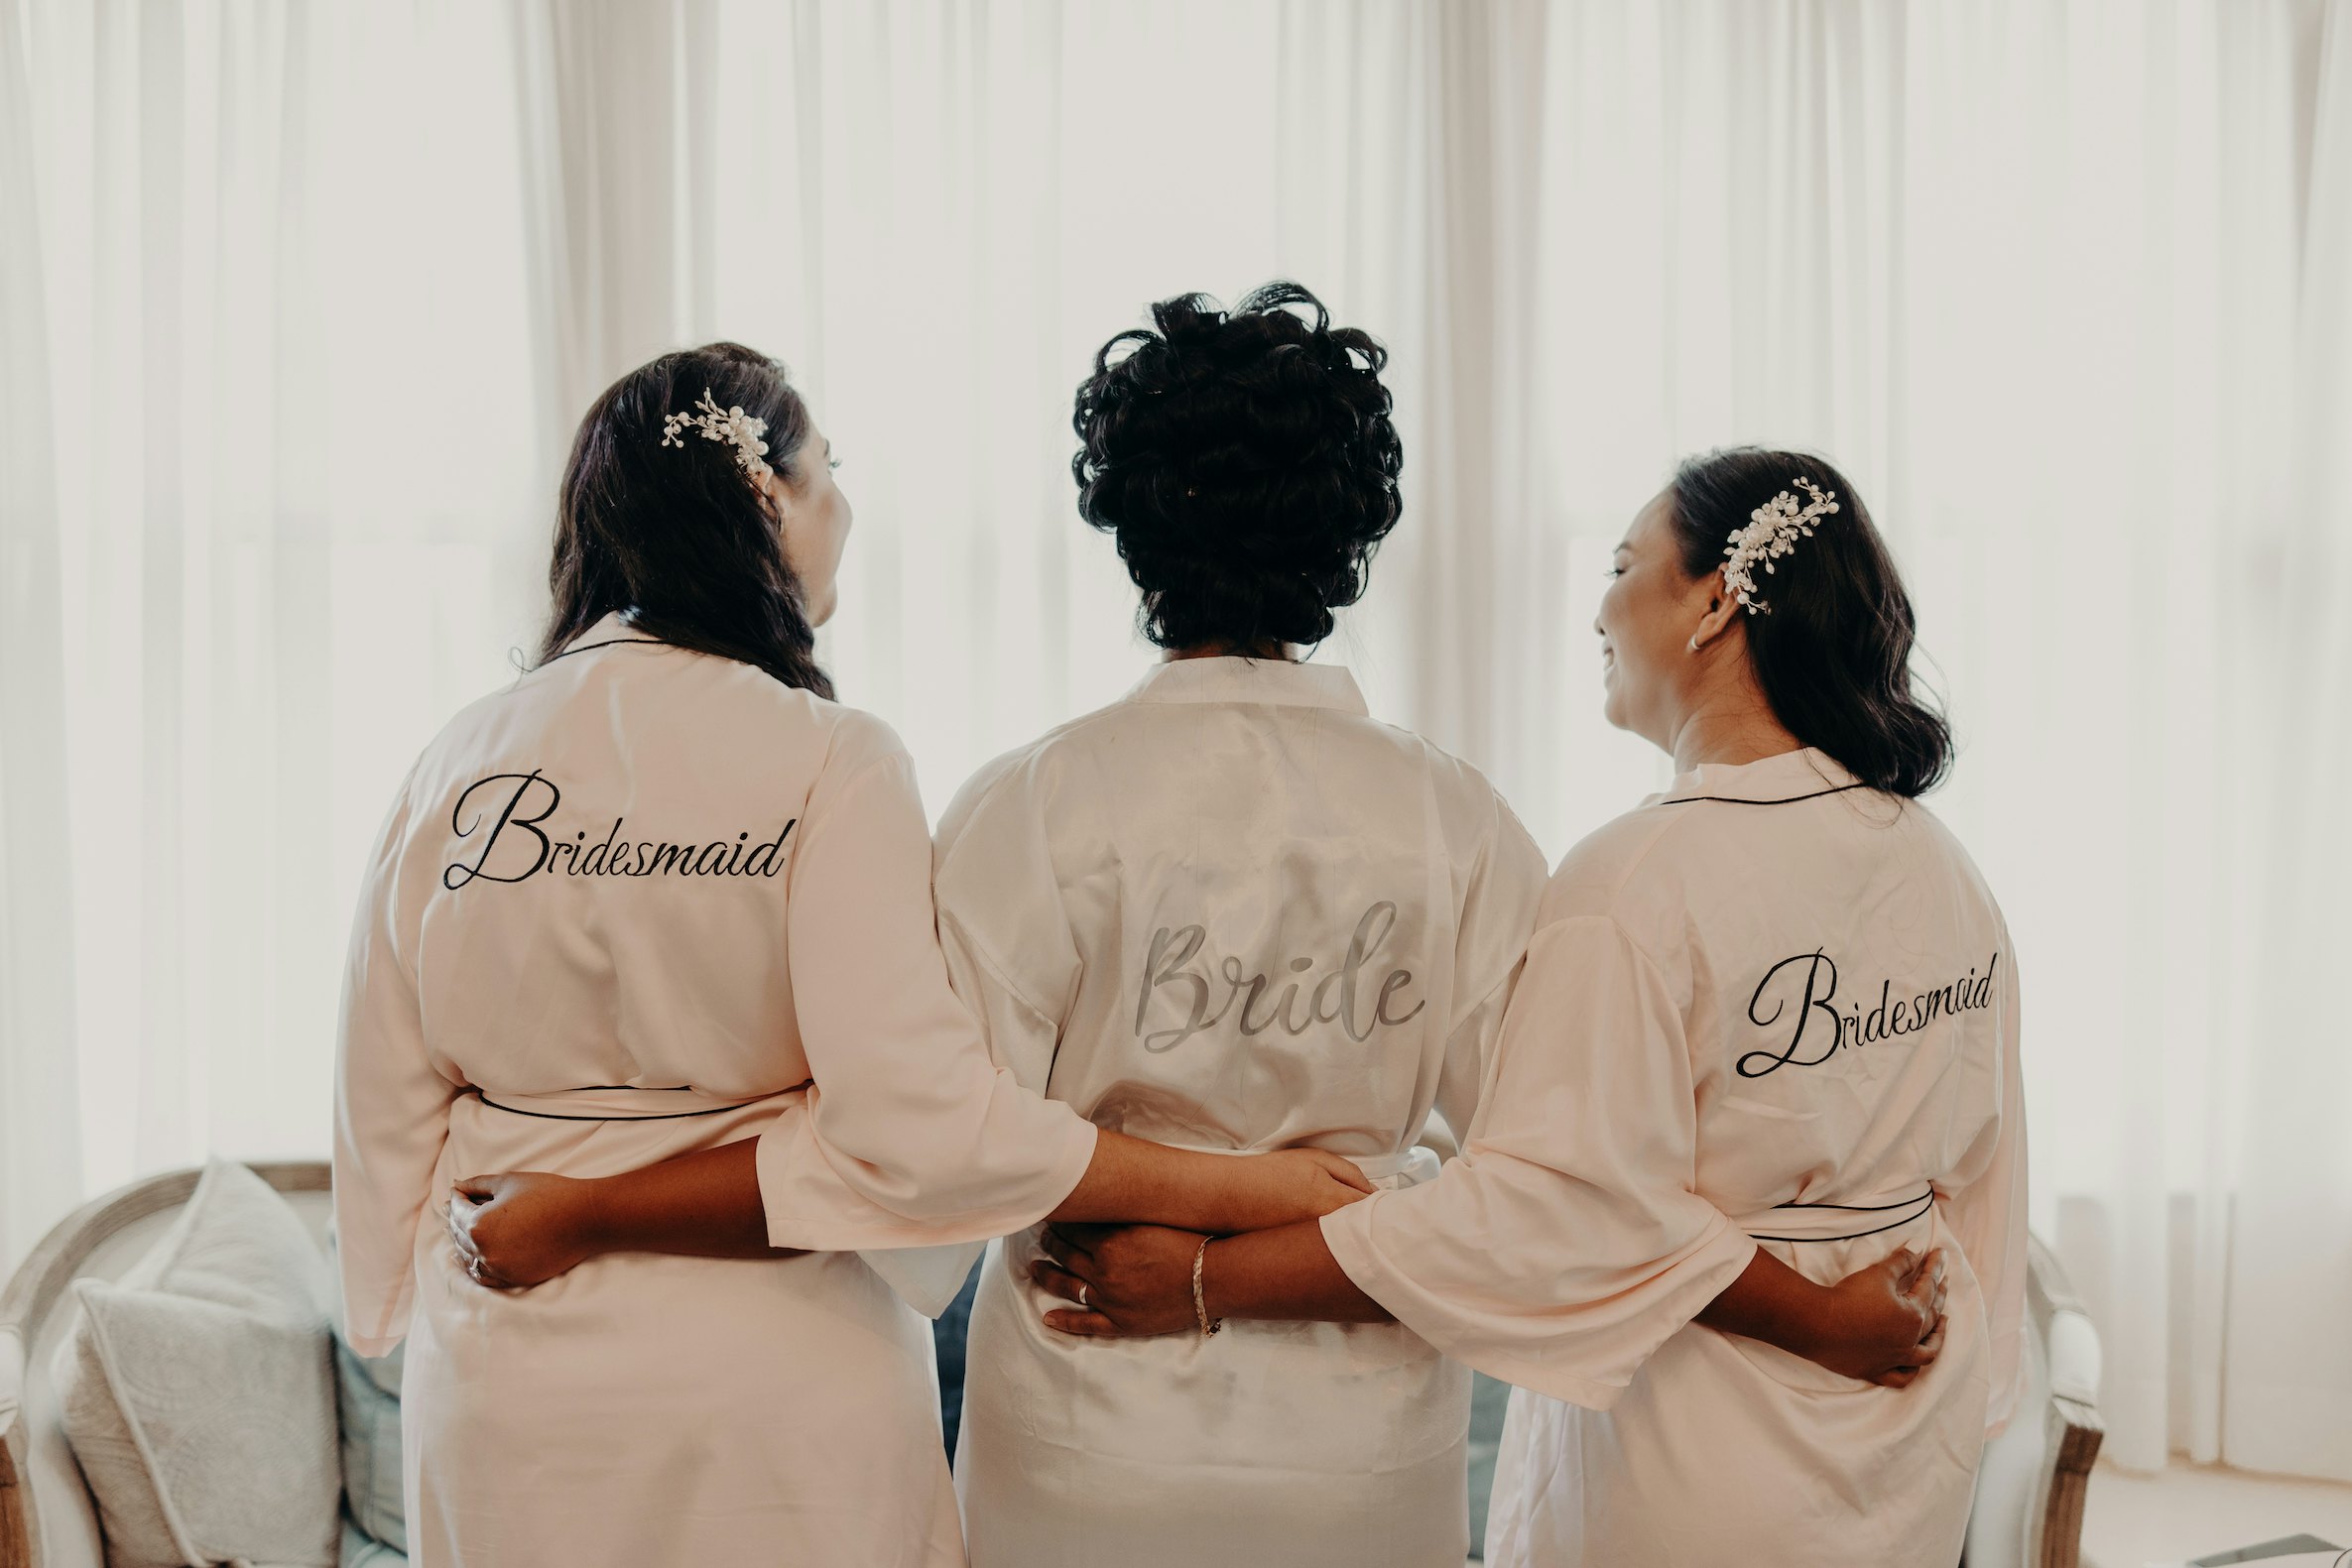 Bride and bridesmaids wearing dressing gowns